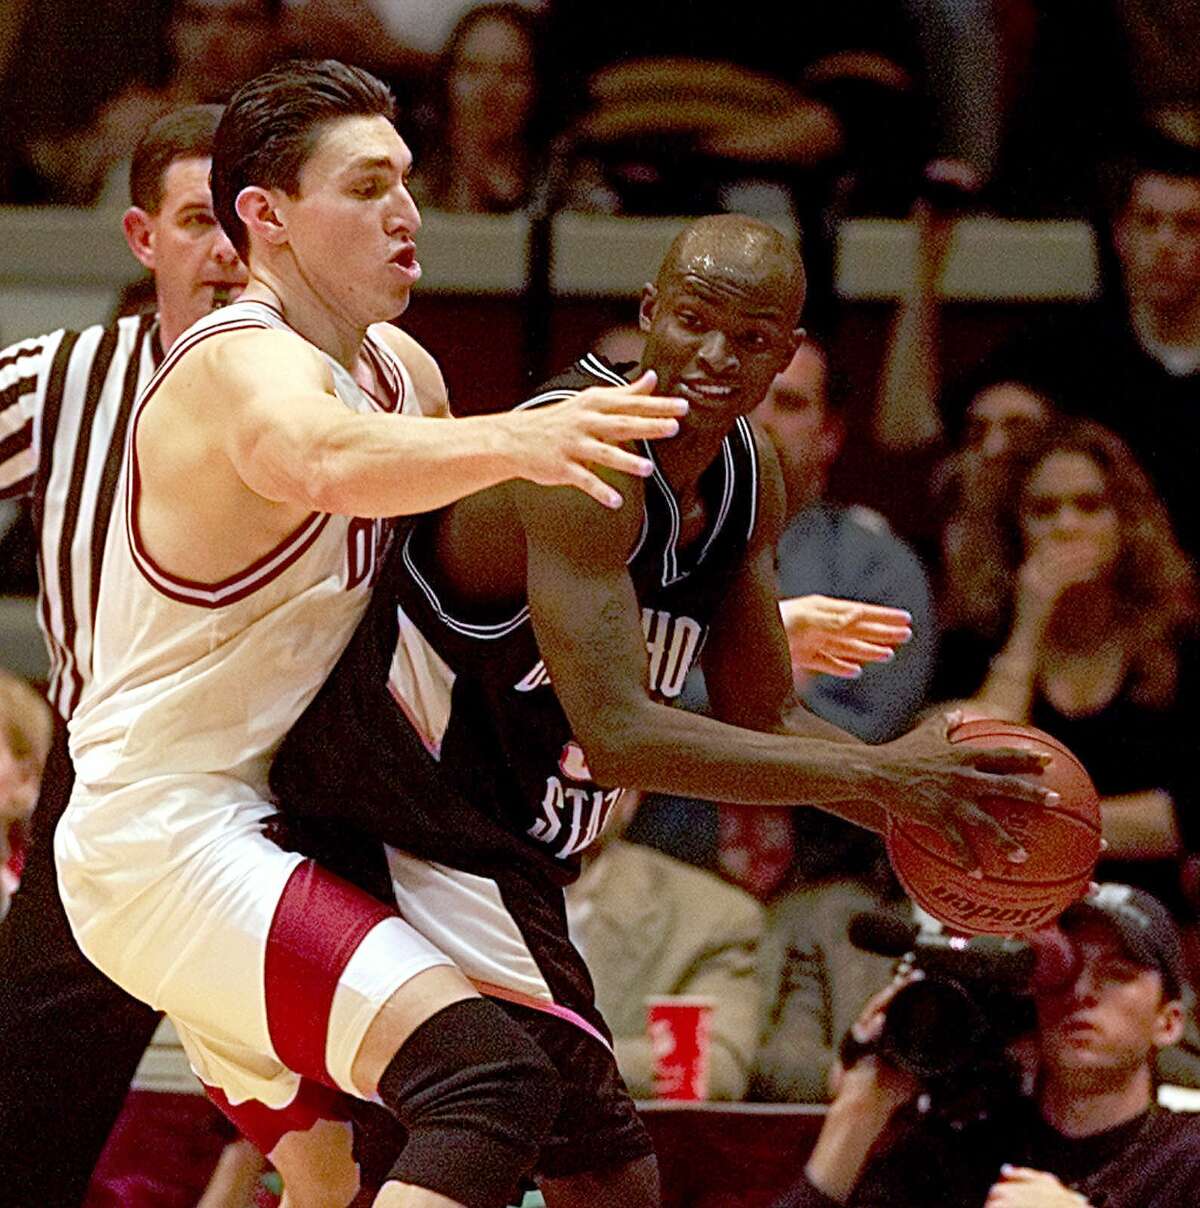 Oklahoma forward Eduardo Najera (21) tries to stop Oklahoma State guard Joe Adkins (35) from moving the ball downcourt during the final two minutes of the Big 12 game in Norman, Oklahoma Saturday, Feb. 12, 2000. Both players scored 21 points in the game, the most of any player. Oklahoma State defeated Oklahoma 74-71.